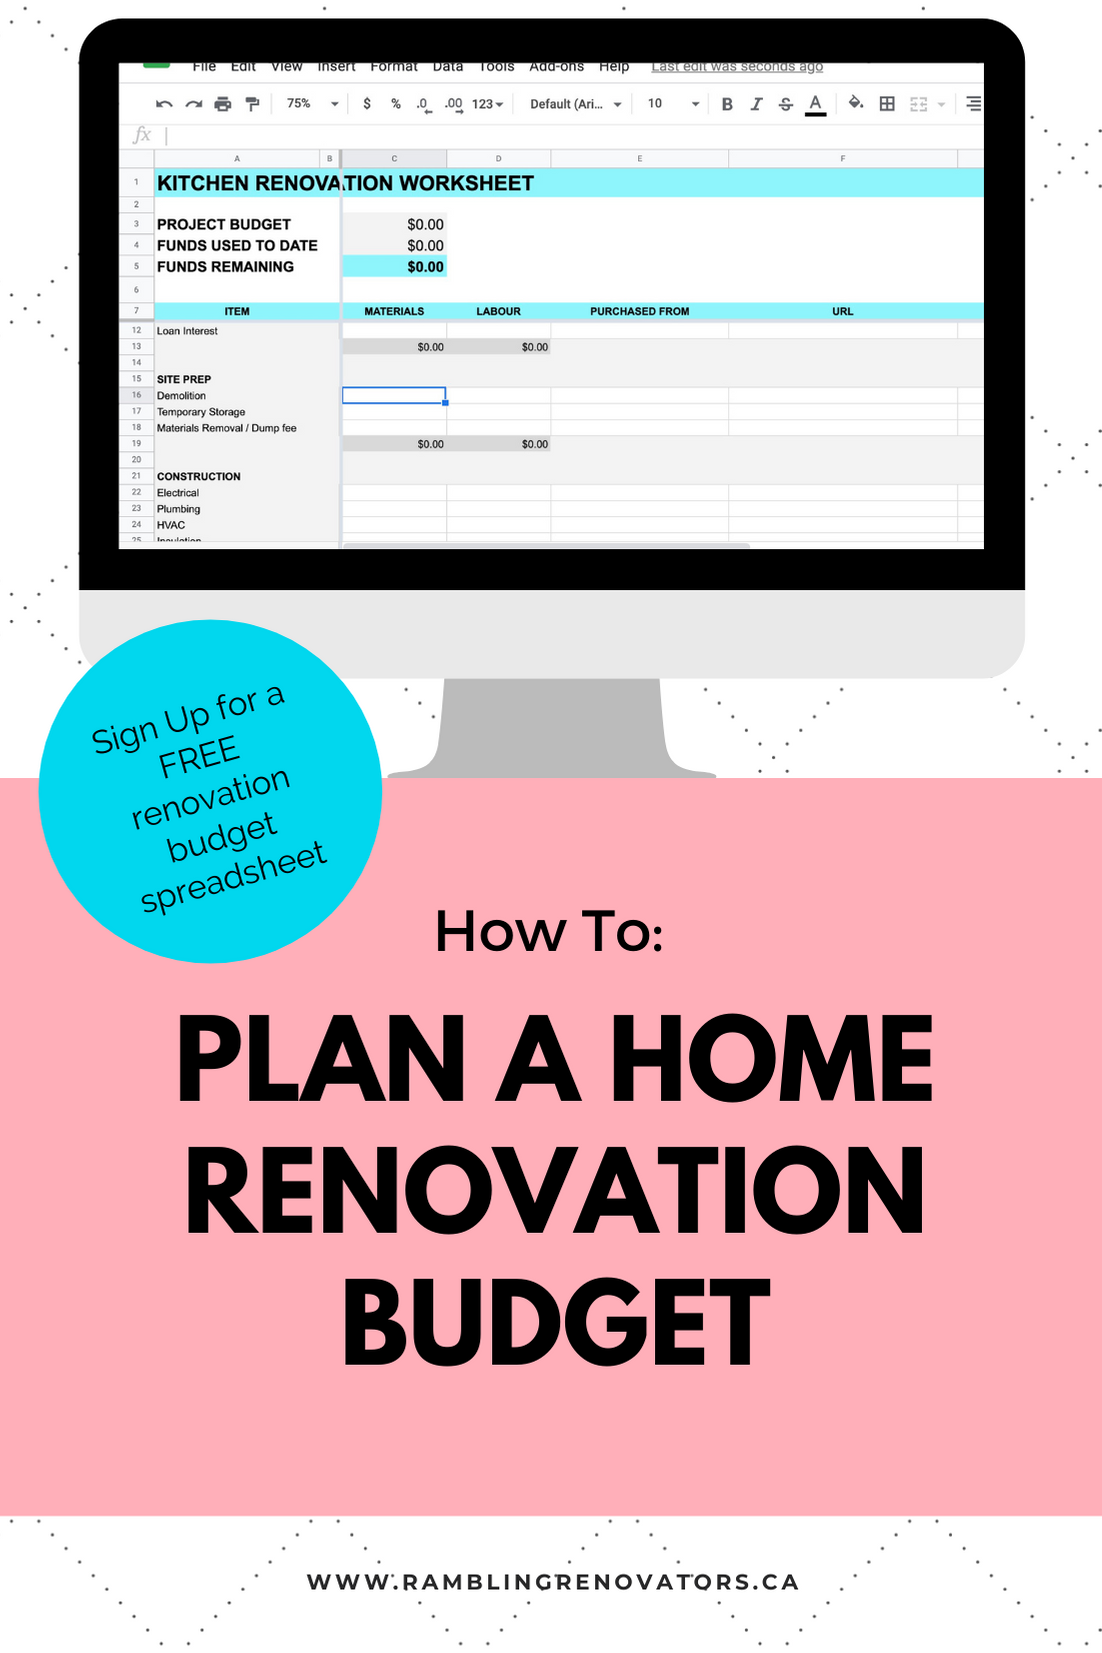 How to Create A Home Renovation Budget (FREE spreadsheet) - ORC  With Regard To Home Renovation Budget Spreadsheet Template Inside Home Renovation Budget Spreadsheet Template